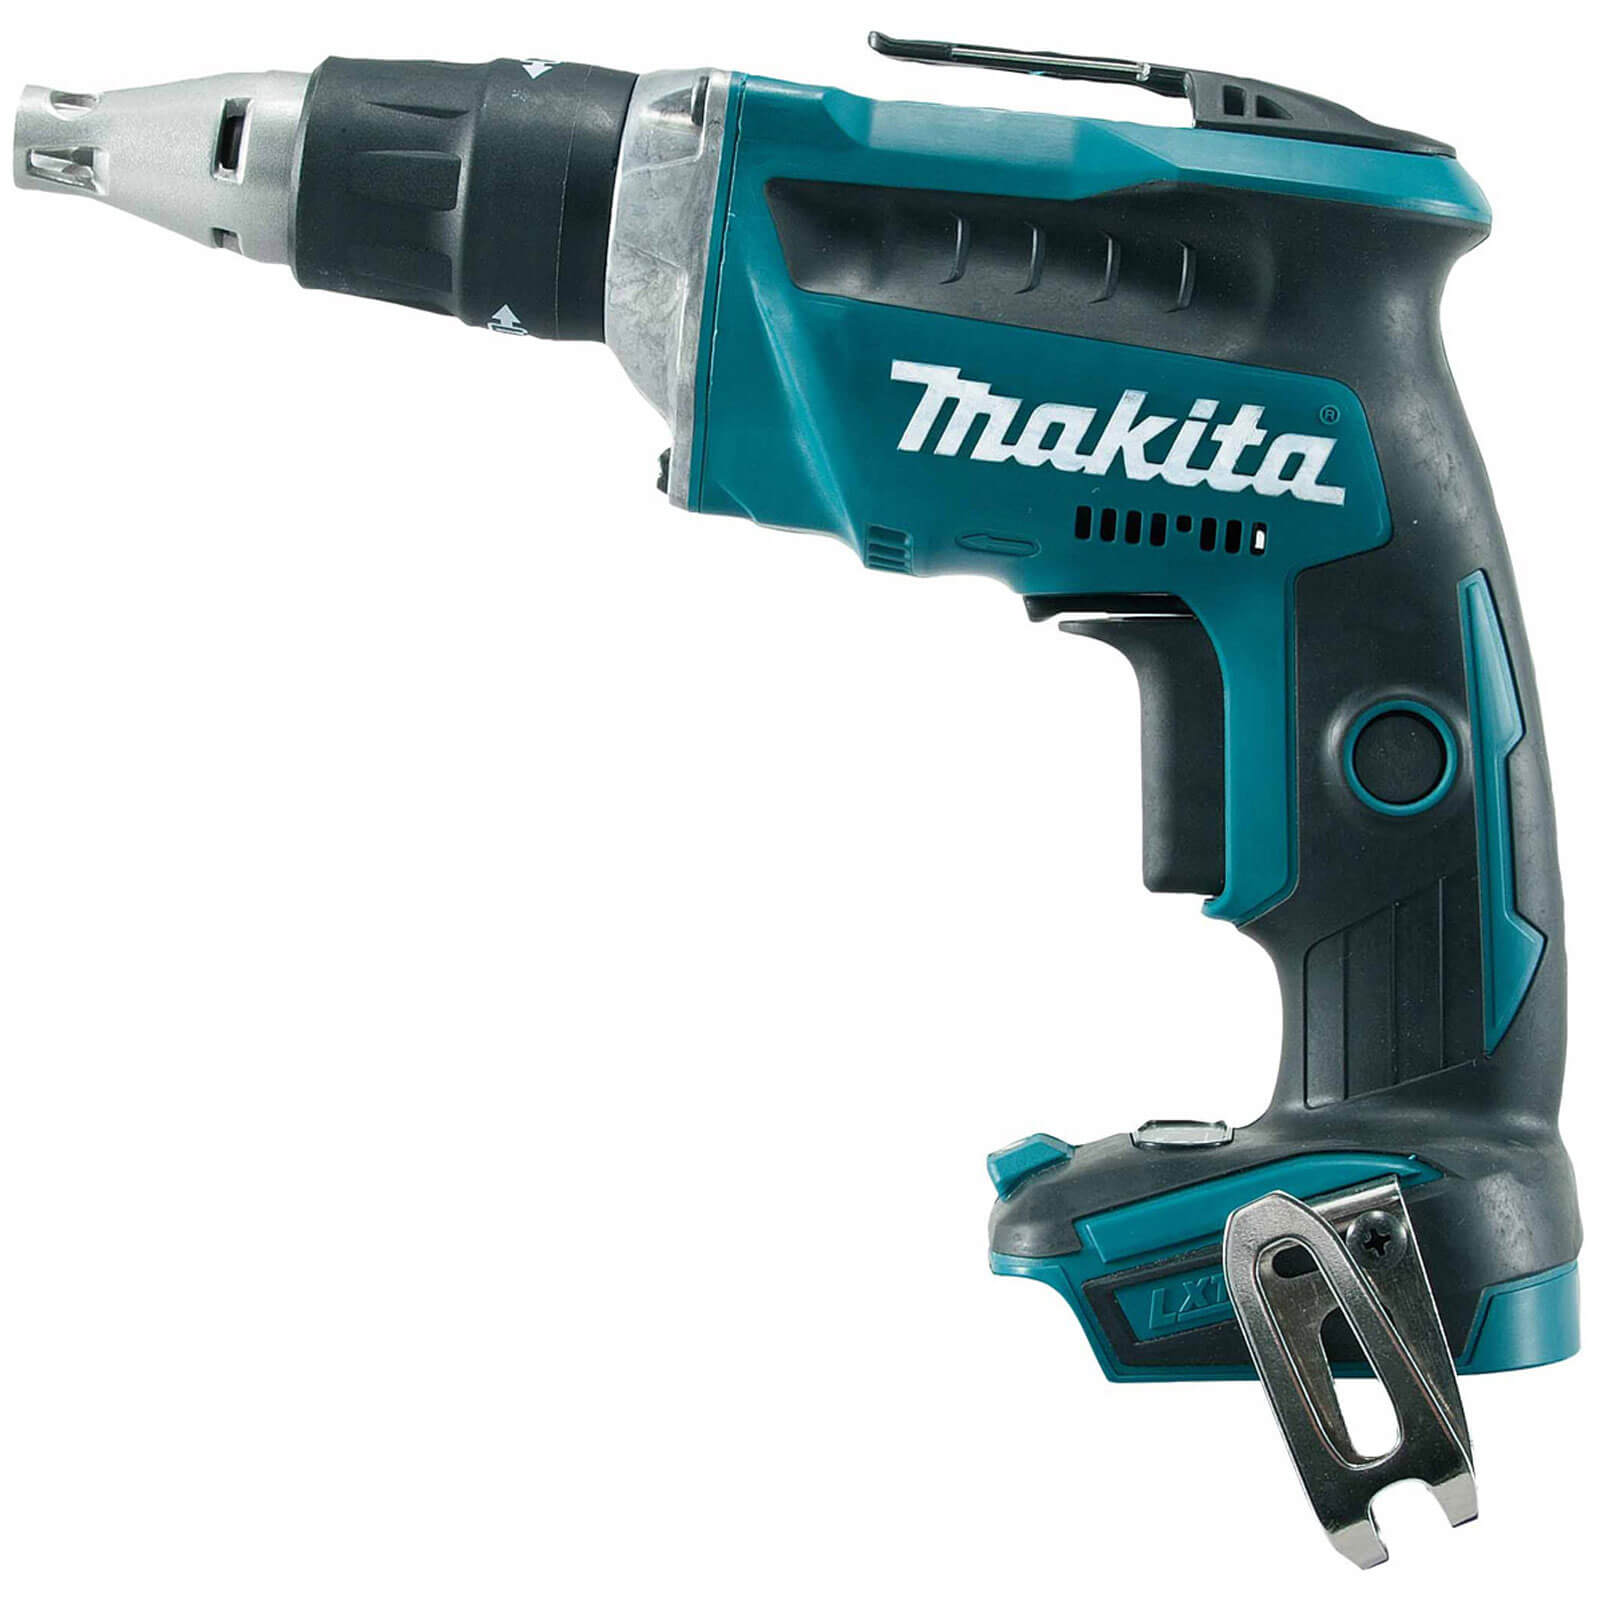 Makita DFS452 18v LXT Cordless Brushless Drywall Screwdriver No Batteries No Charger No Case